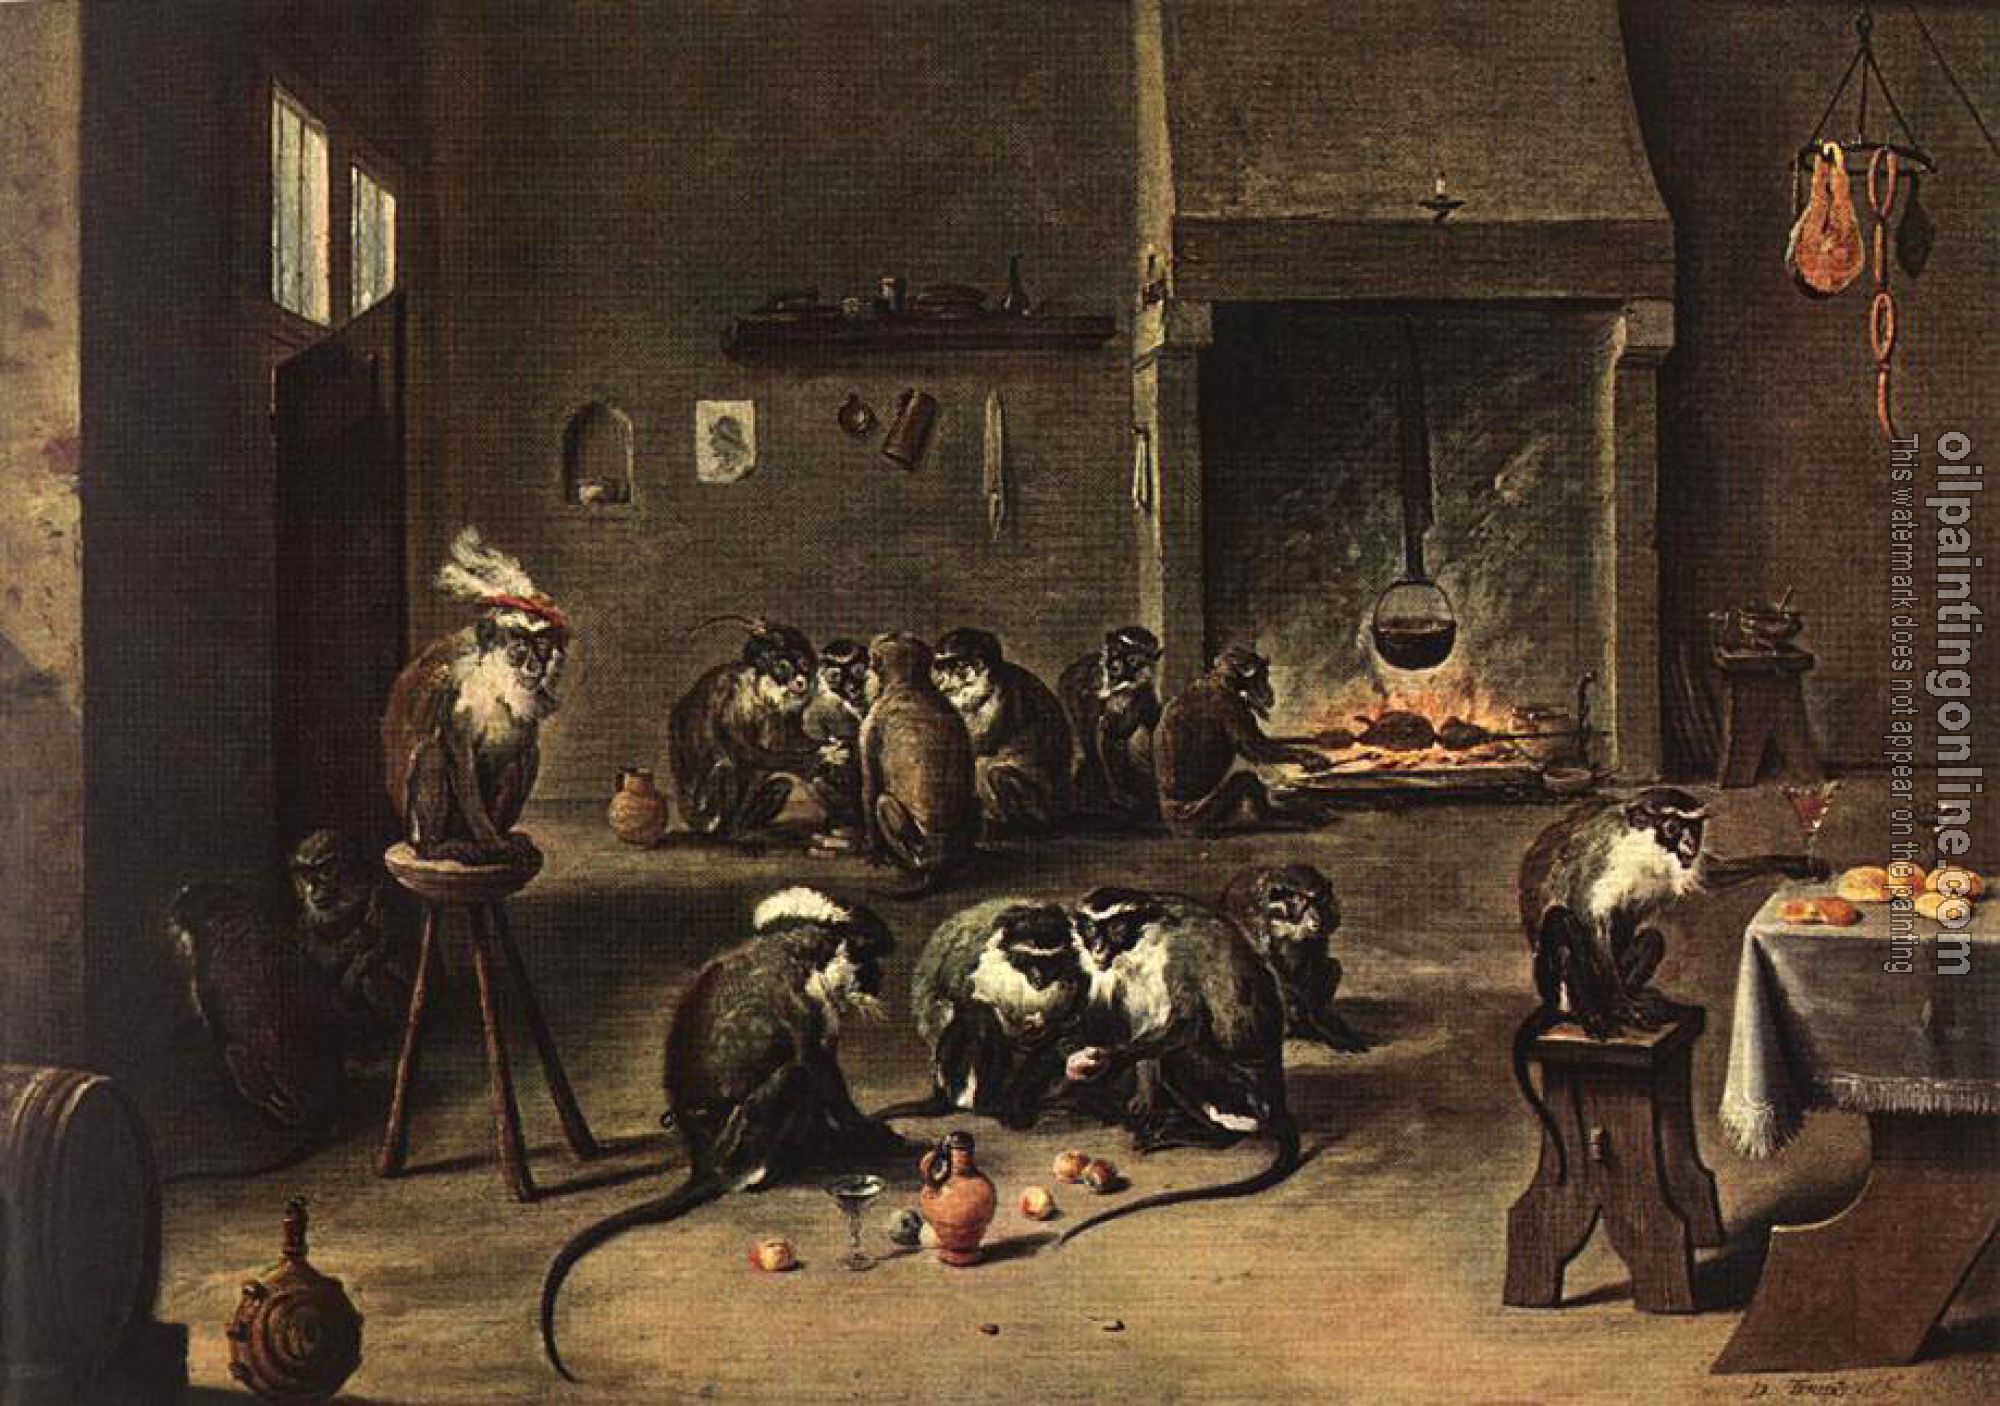 David Teniers the Younger - Apes in the Kitchen